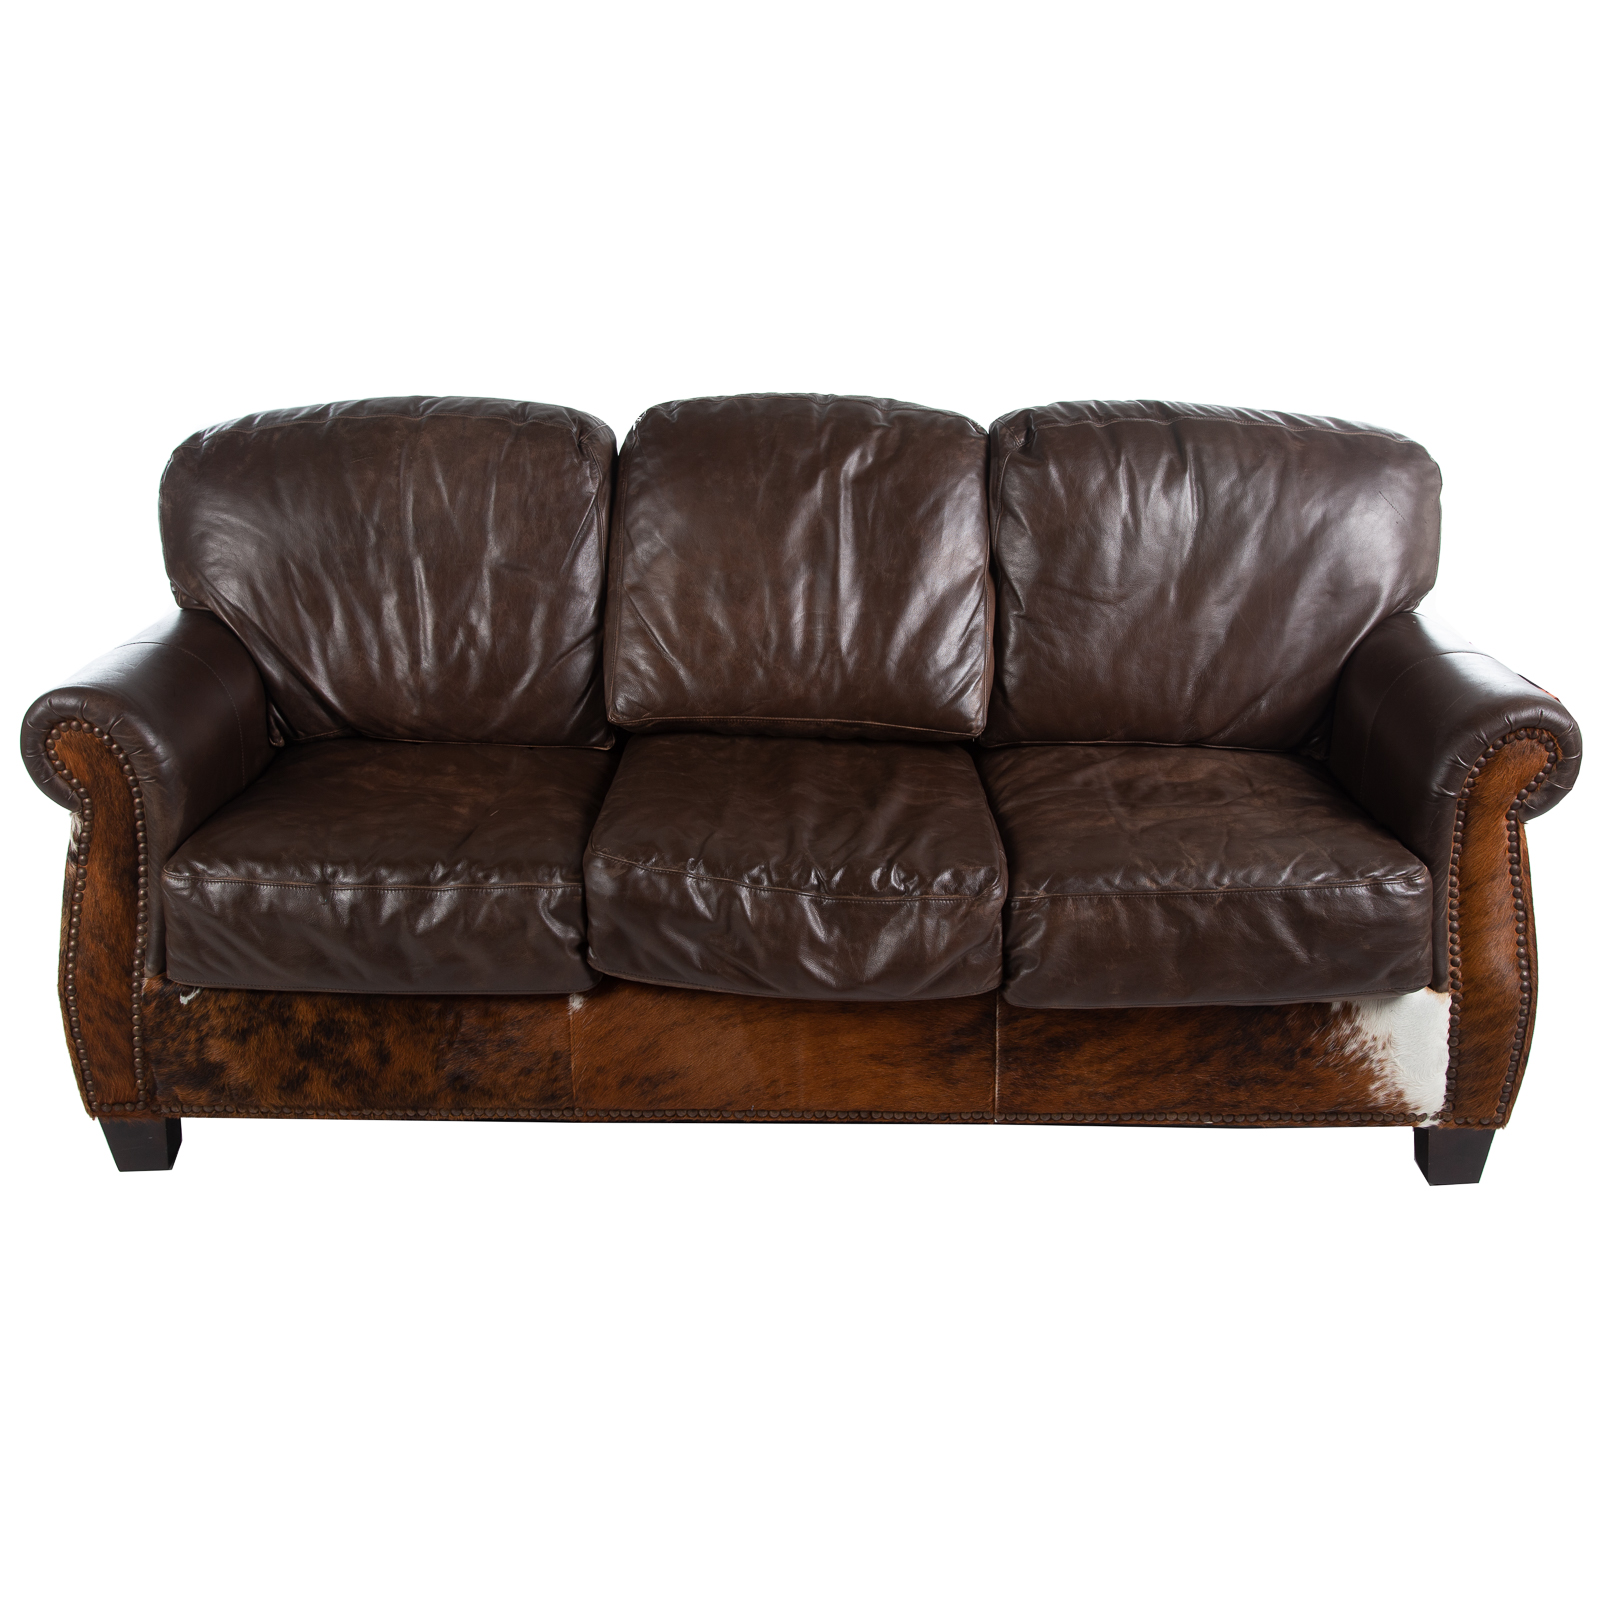 COWHIDE LEATHER UPHOLSTERED SOFA 36a501